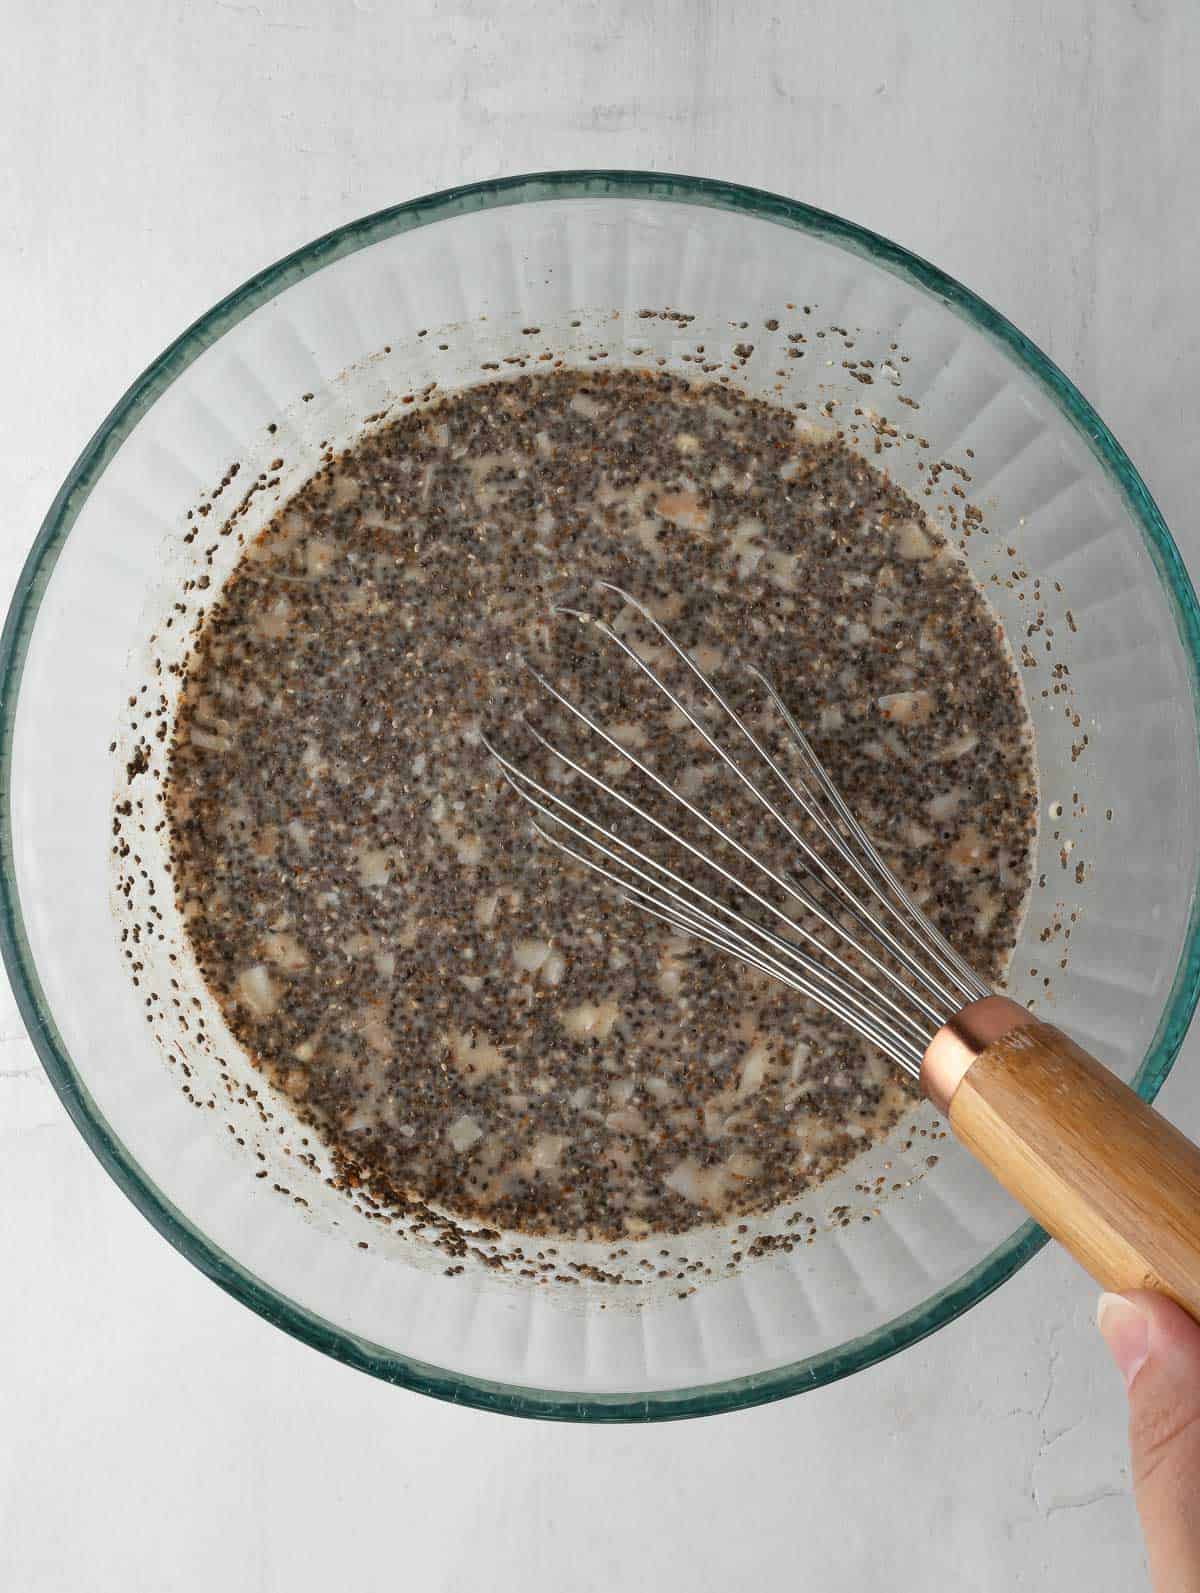 chia seeds being mixed in a bowl